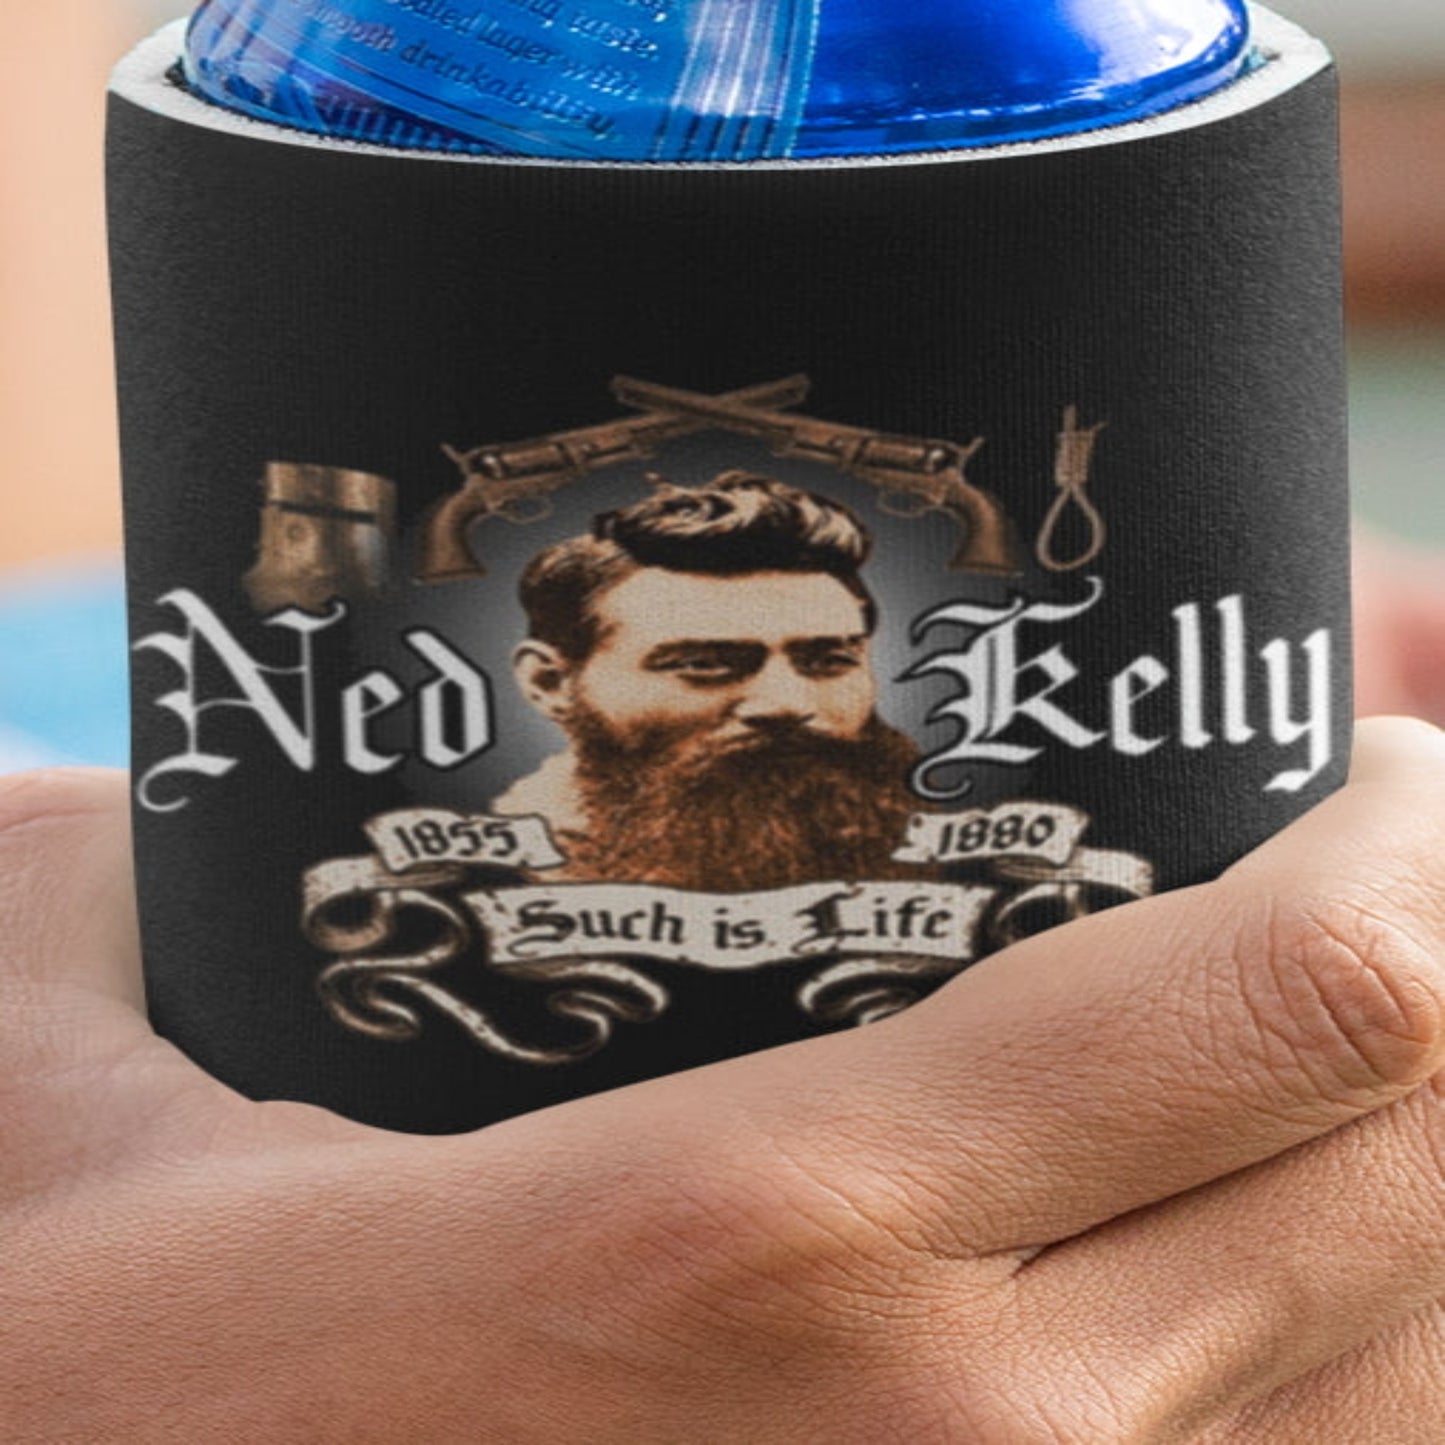 Ned Kelly 5 pack Stubby Coolers